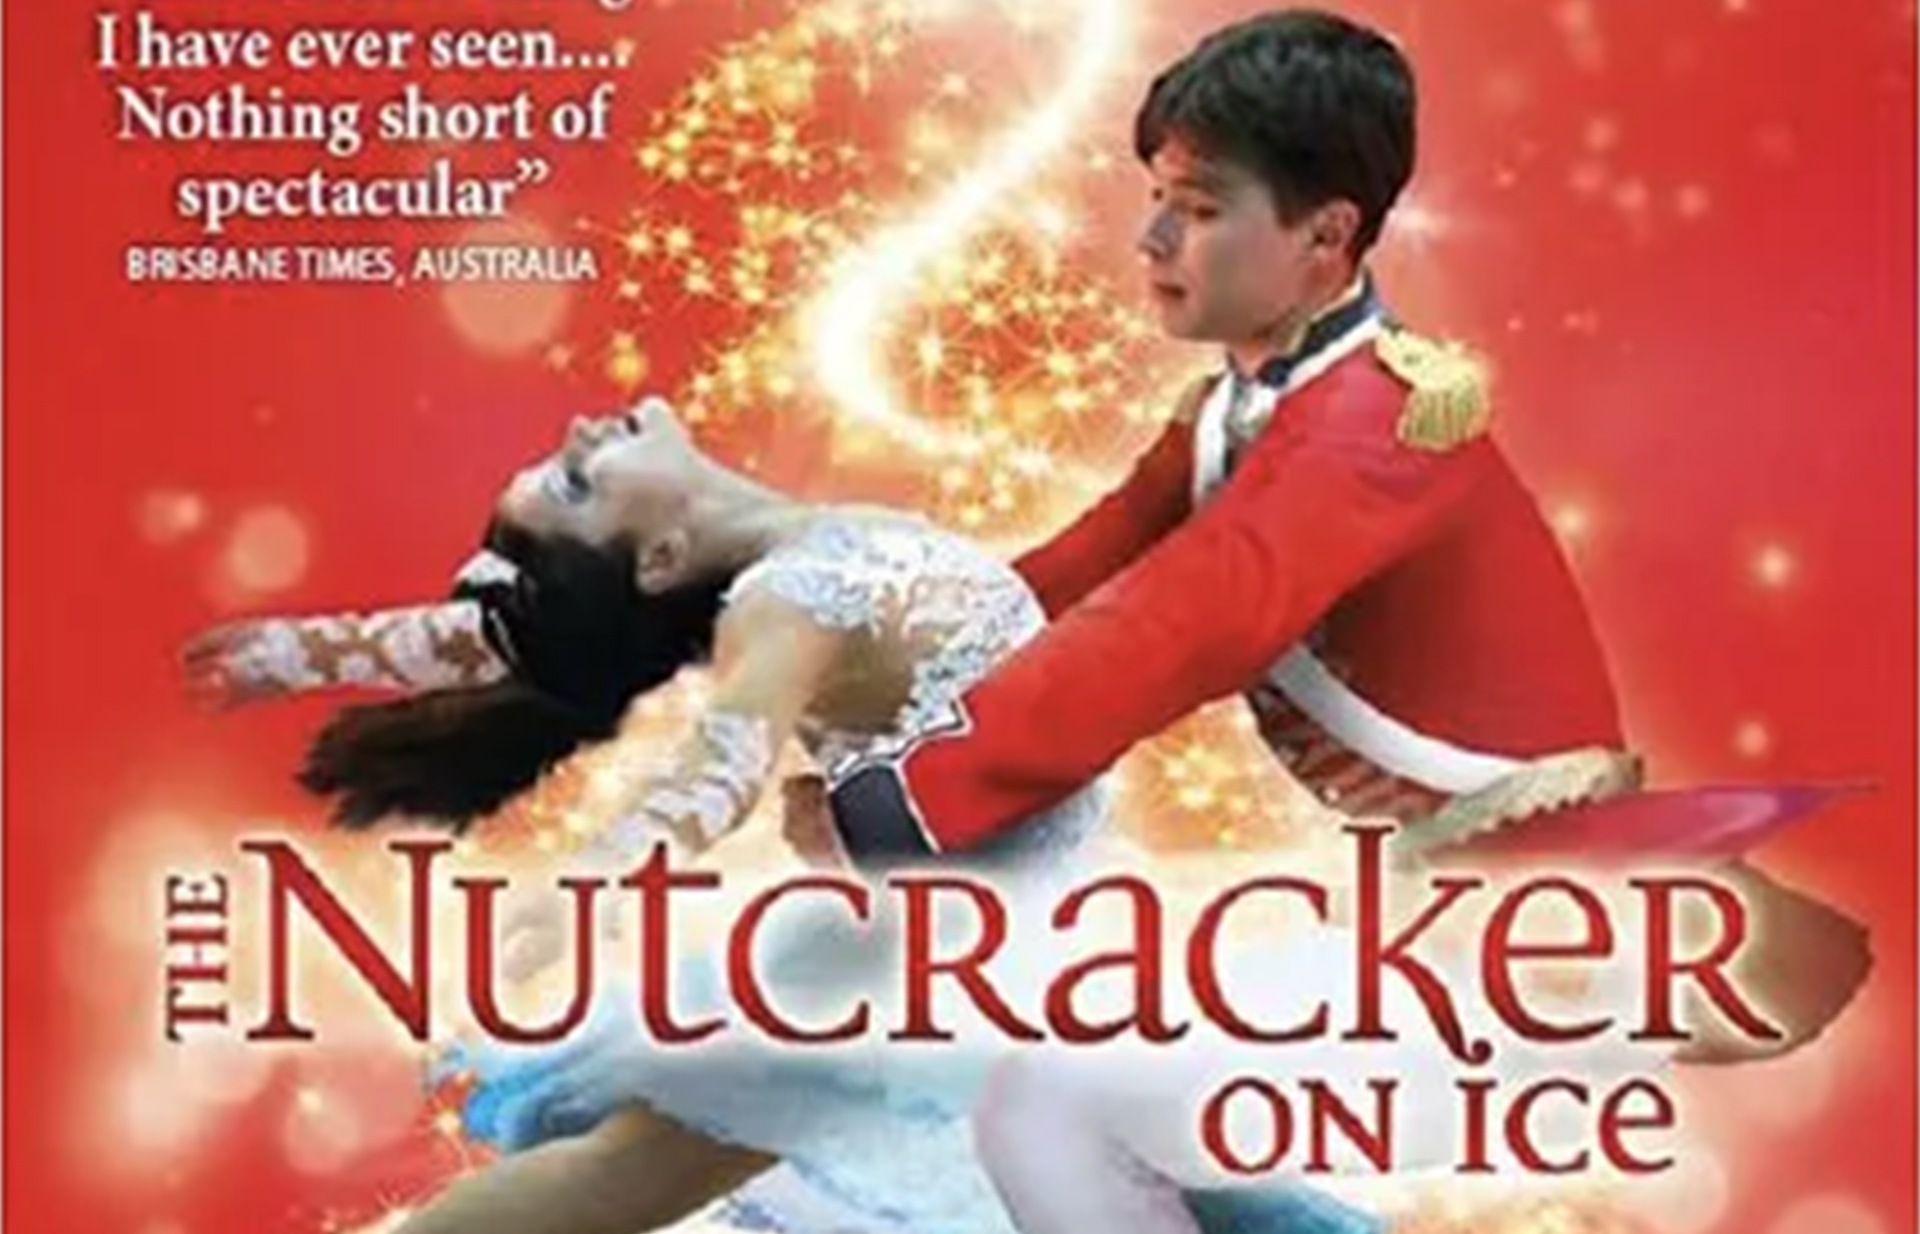 Nutcracker on Ice: Ballet Performance at Sands Theatre, Singapore